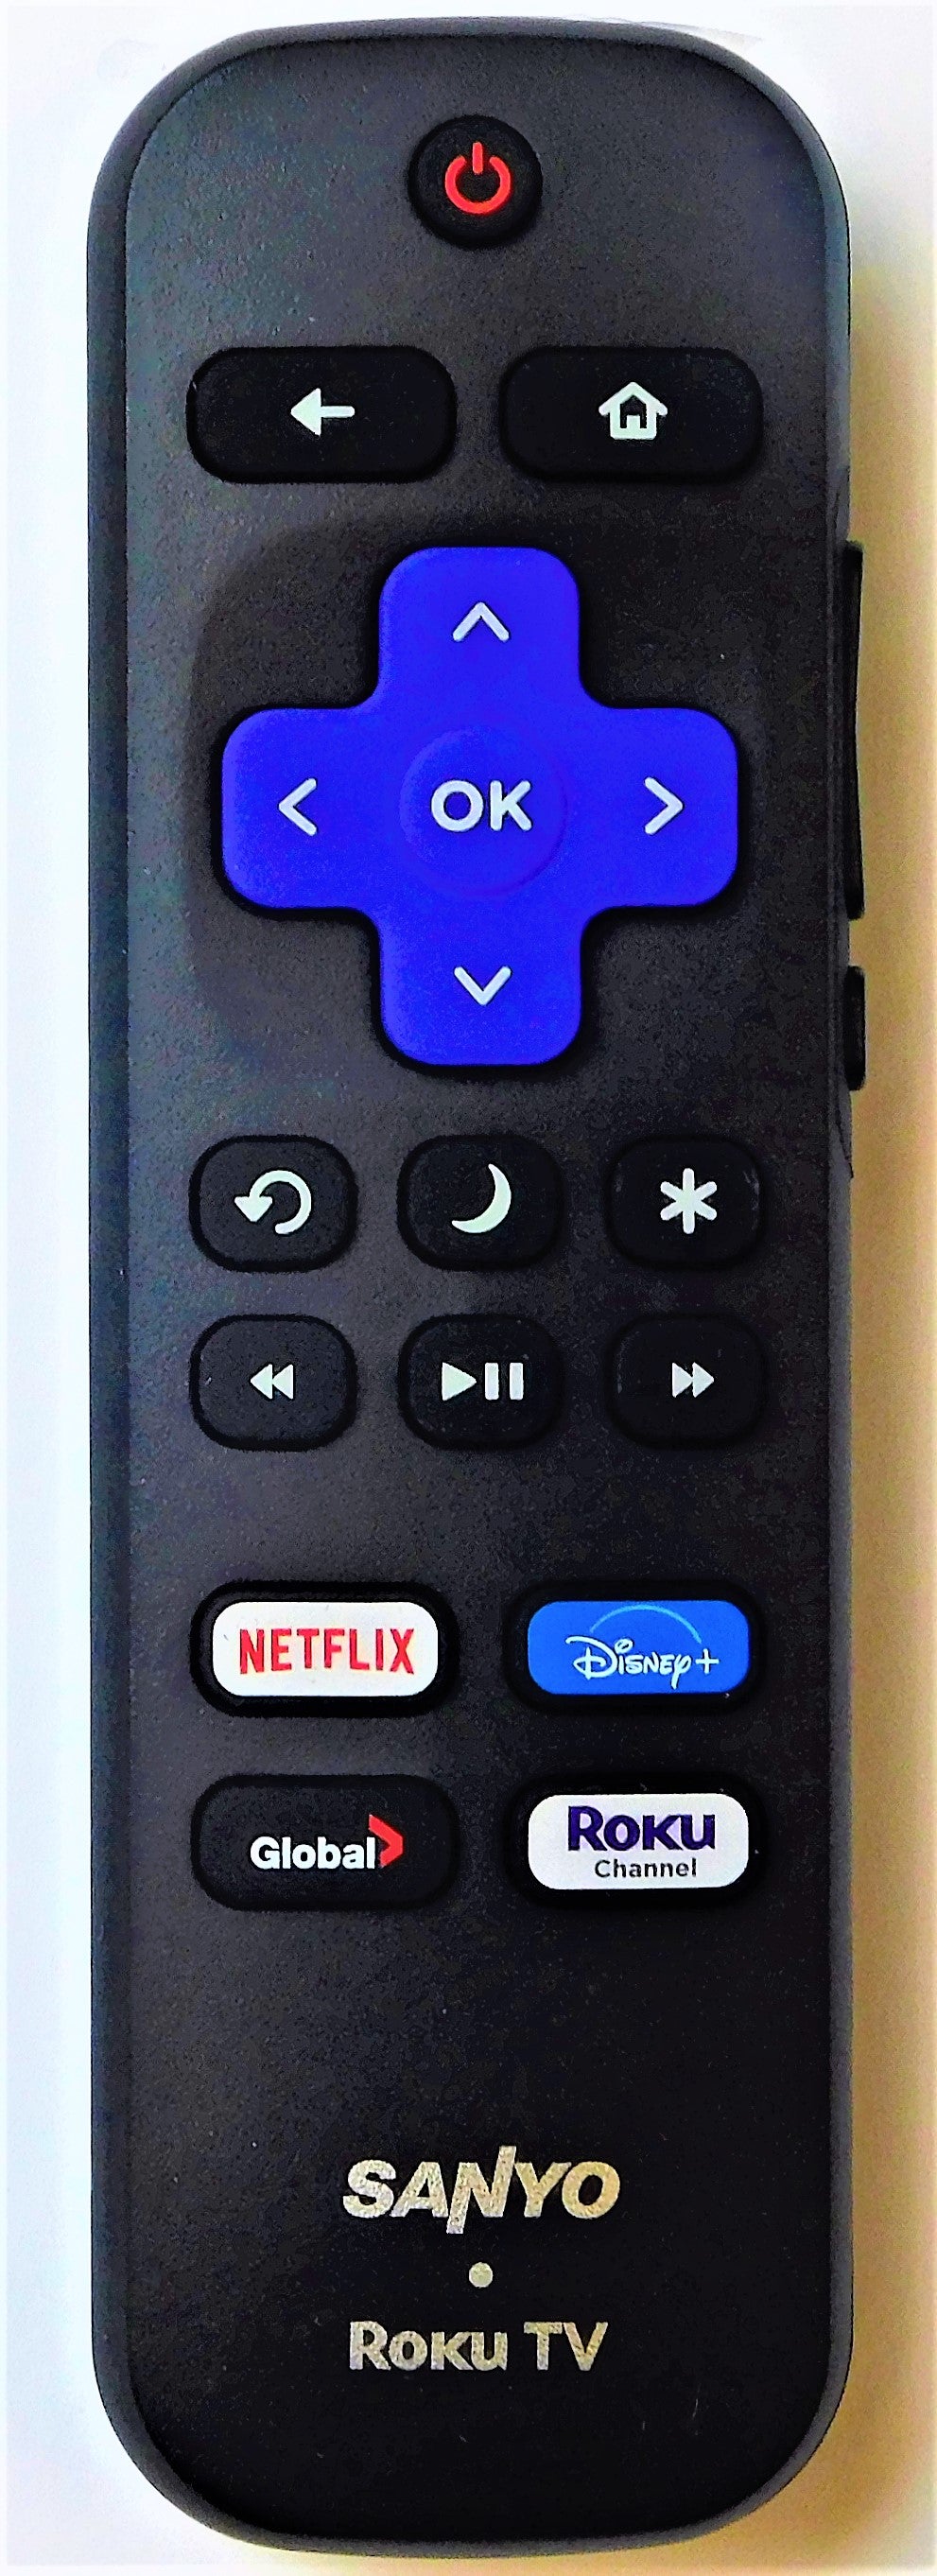 OEM replacement remote control for Sanyo Roku TV URMT21CND020